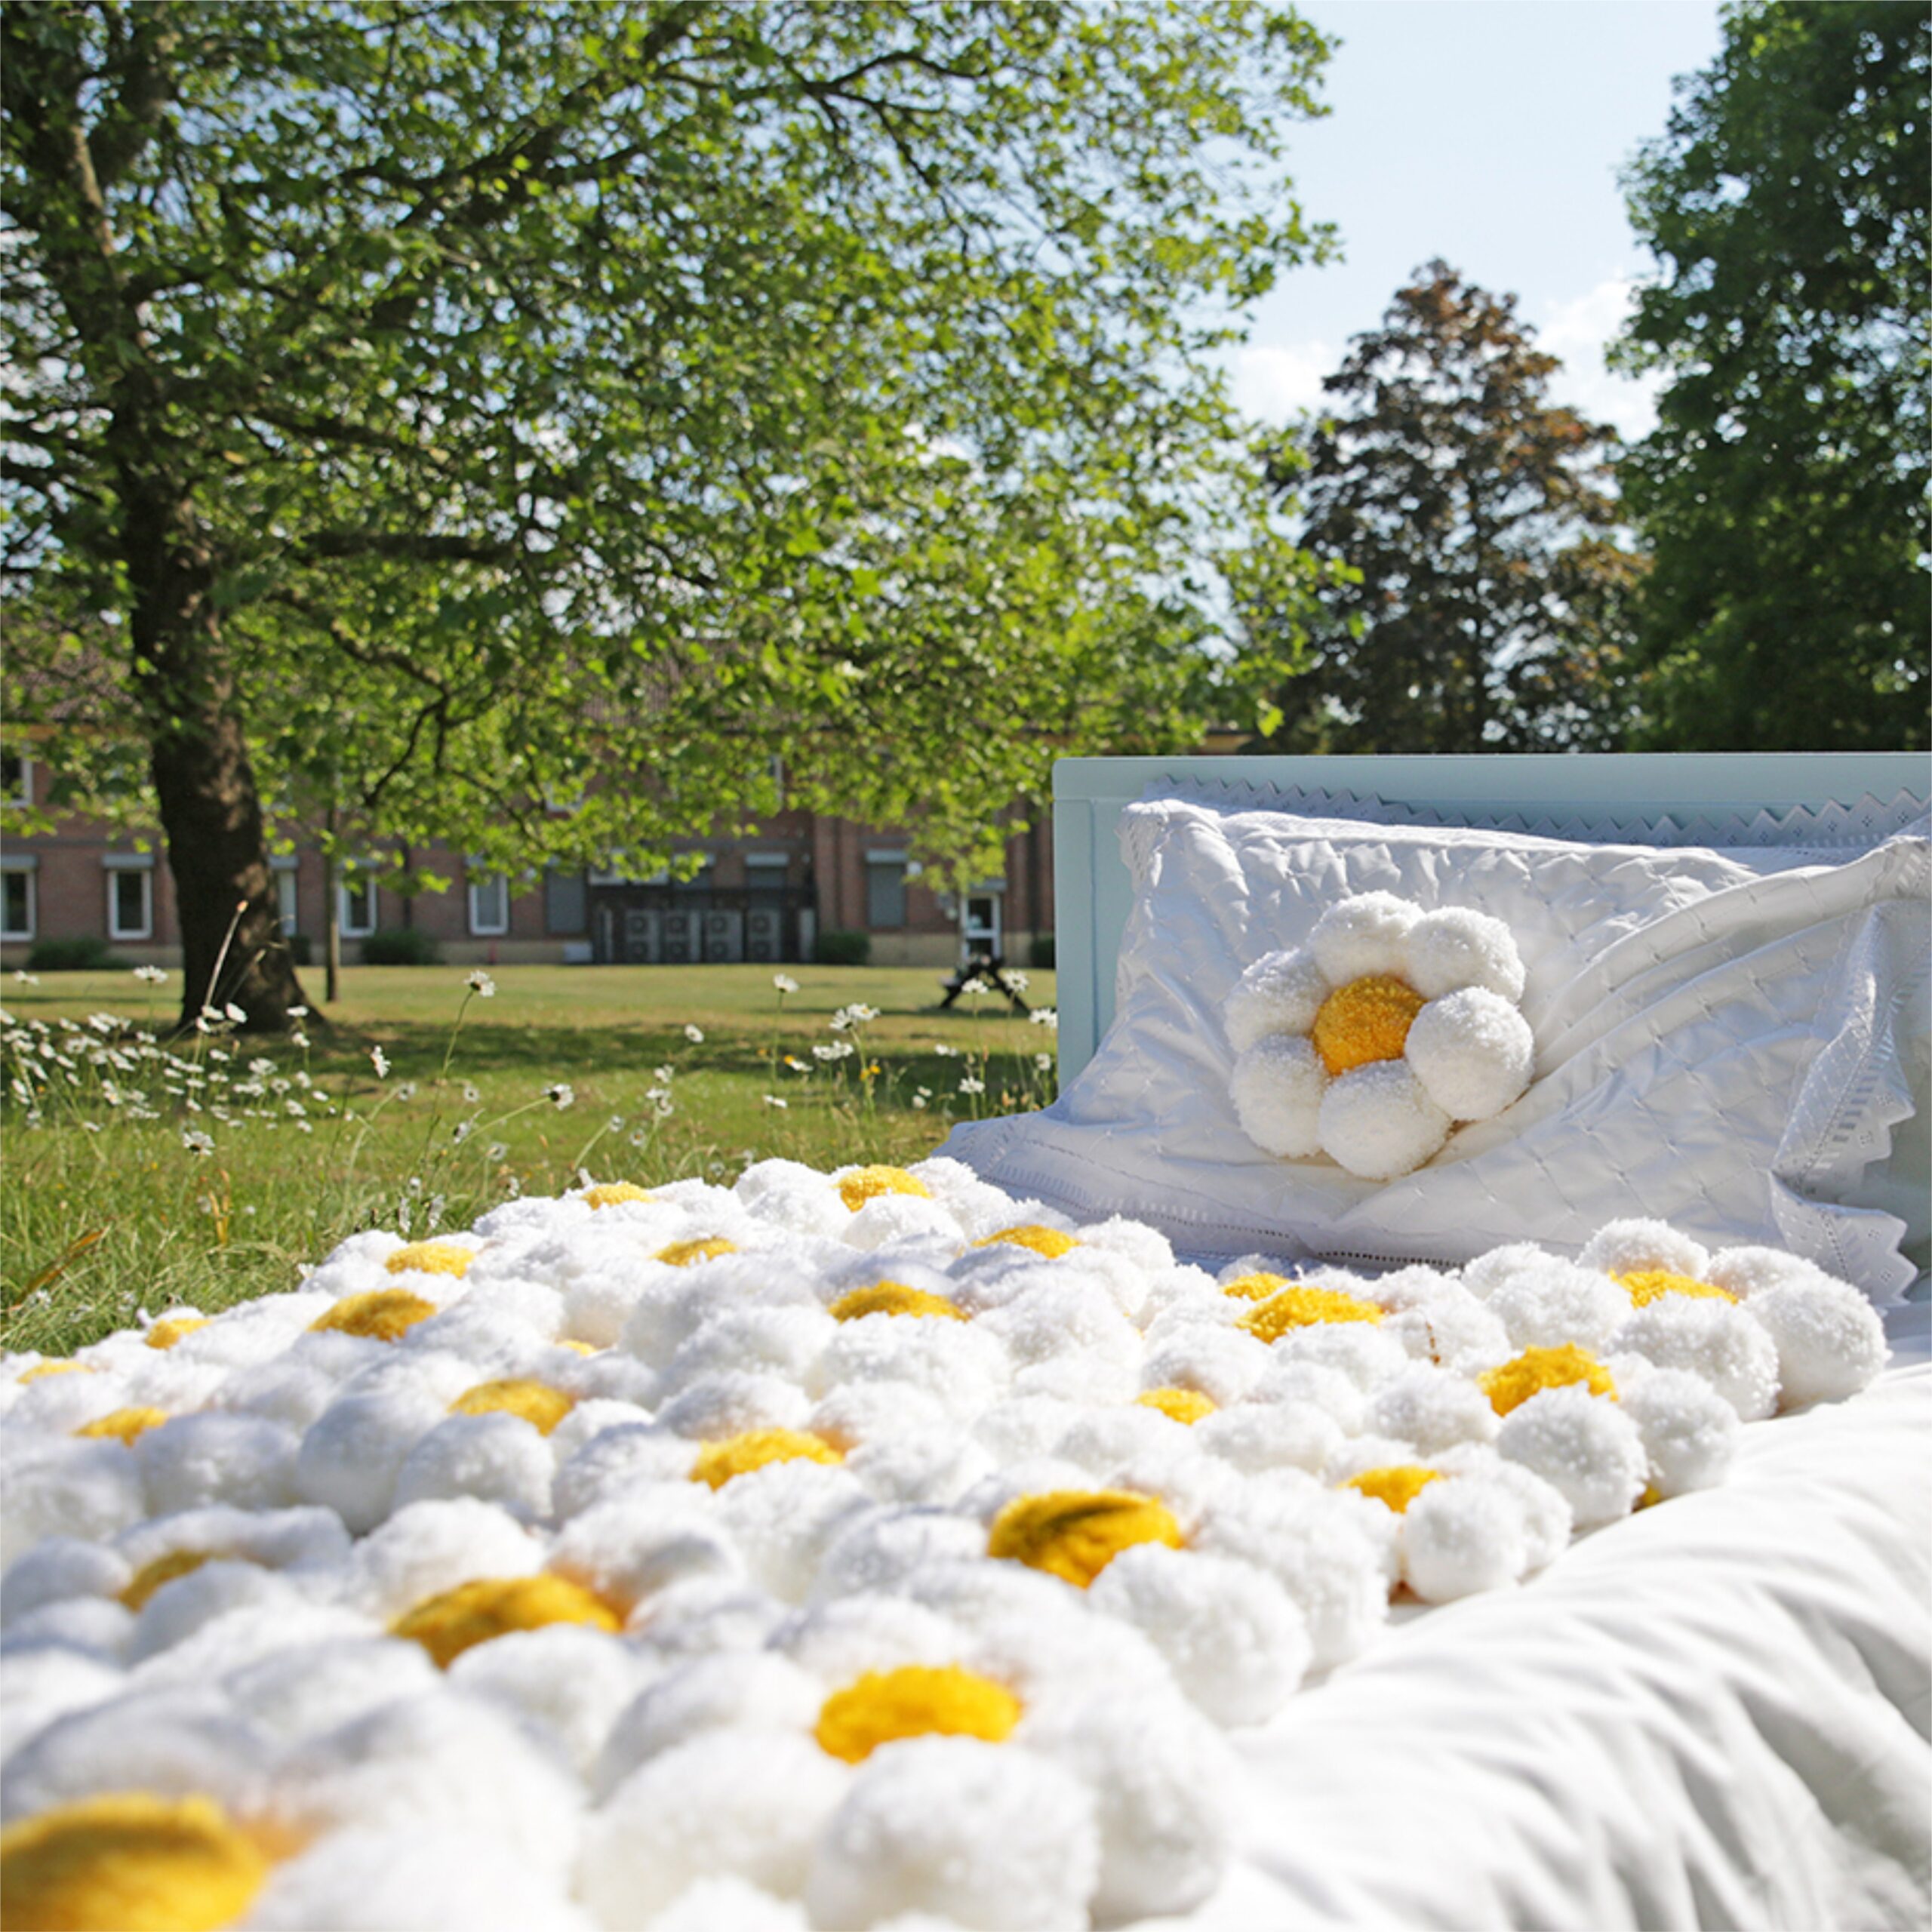 Bed outside in a field. On the bed is white pillow and quilt covered in white and yellow pom poms in the shape of daisies. In the background is grass and trees.